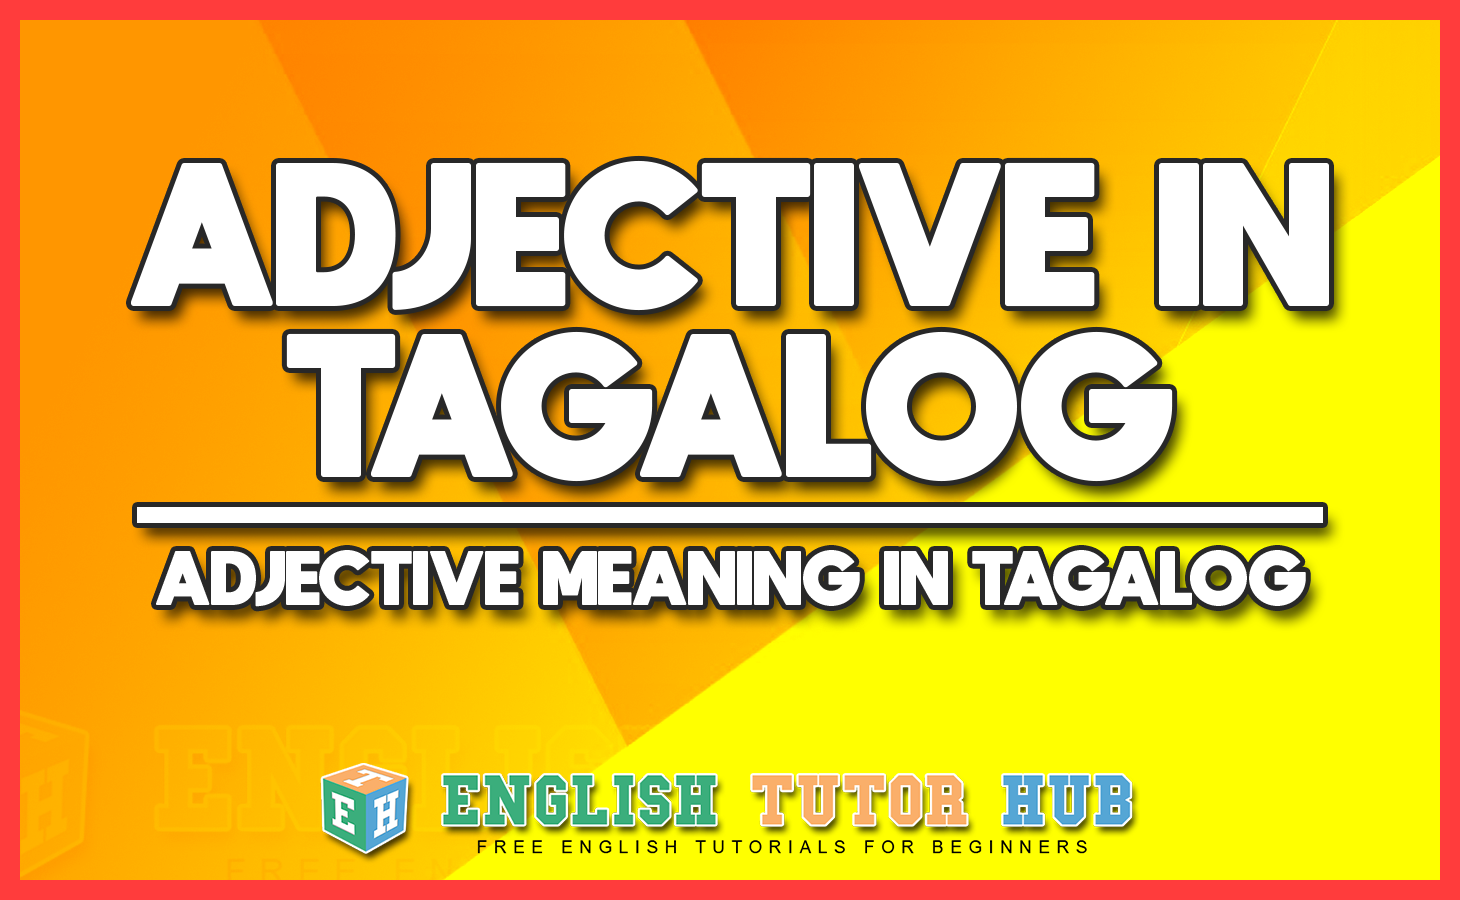 Adjective in Tagalog - Adjective Meaning in Tagalog